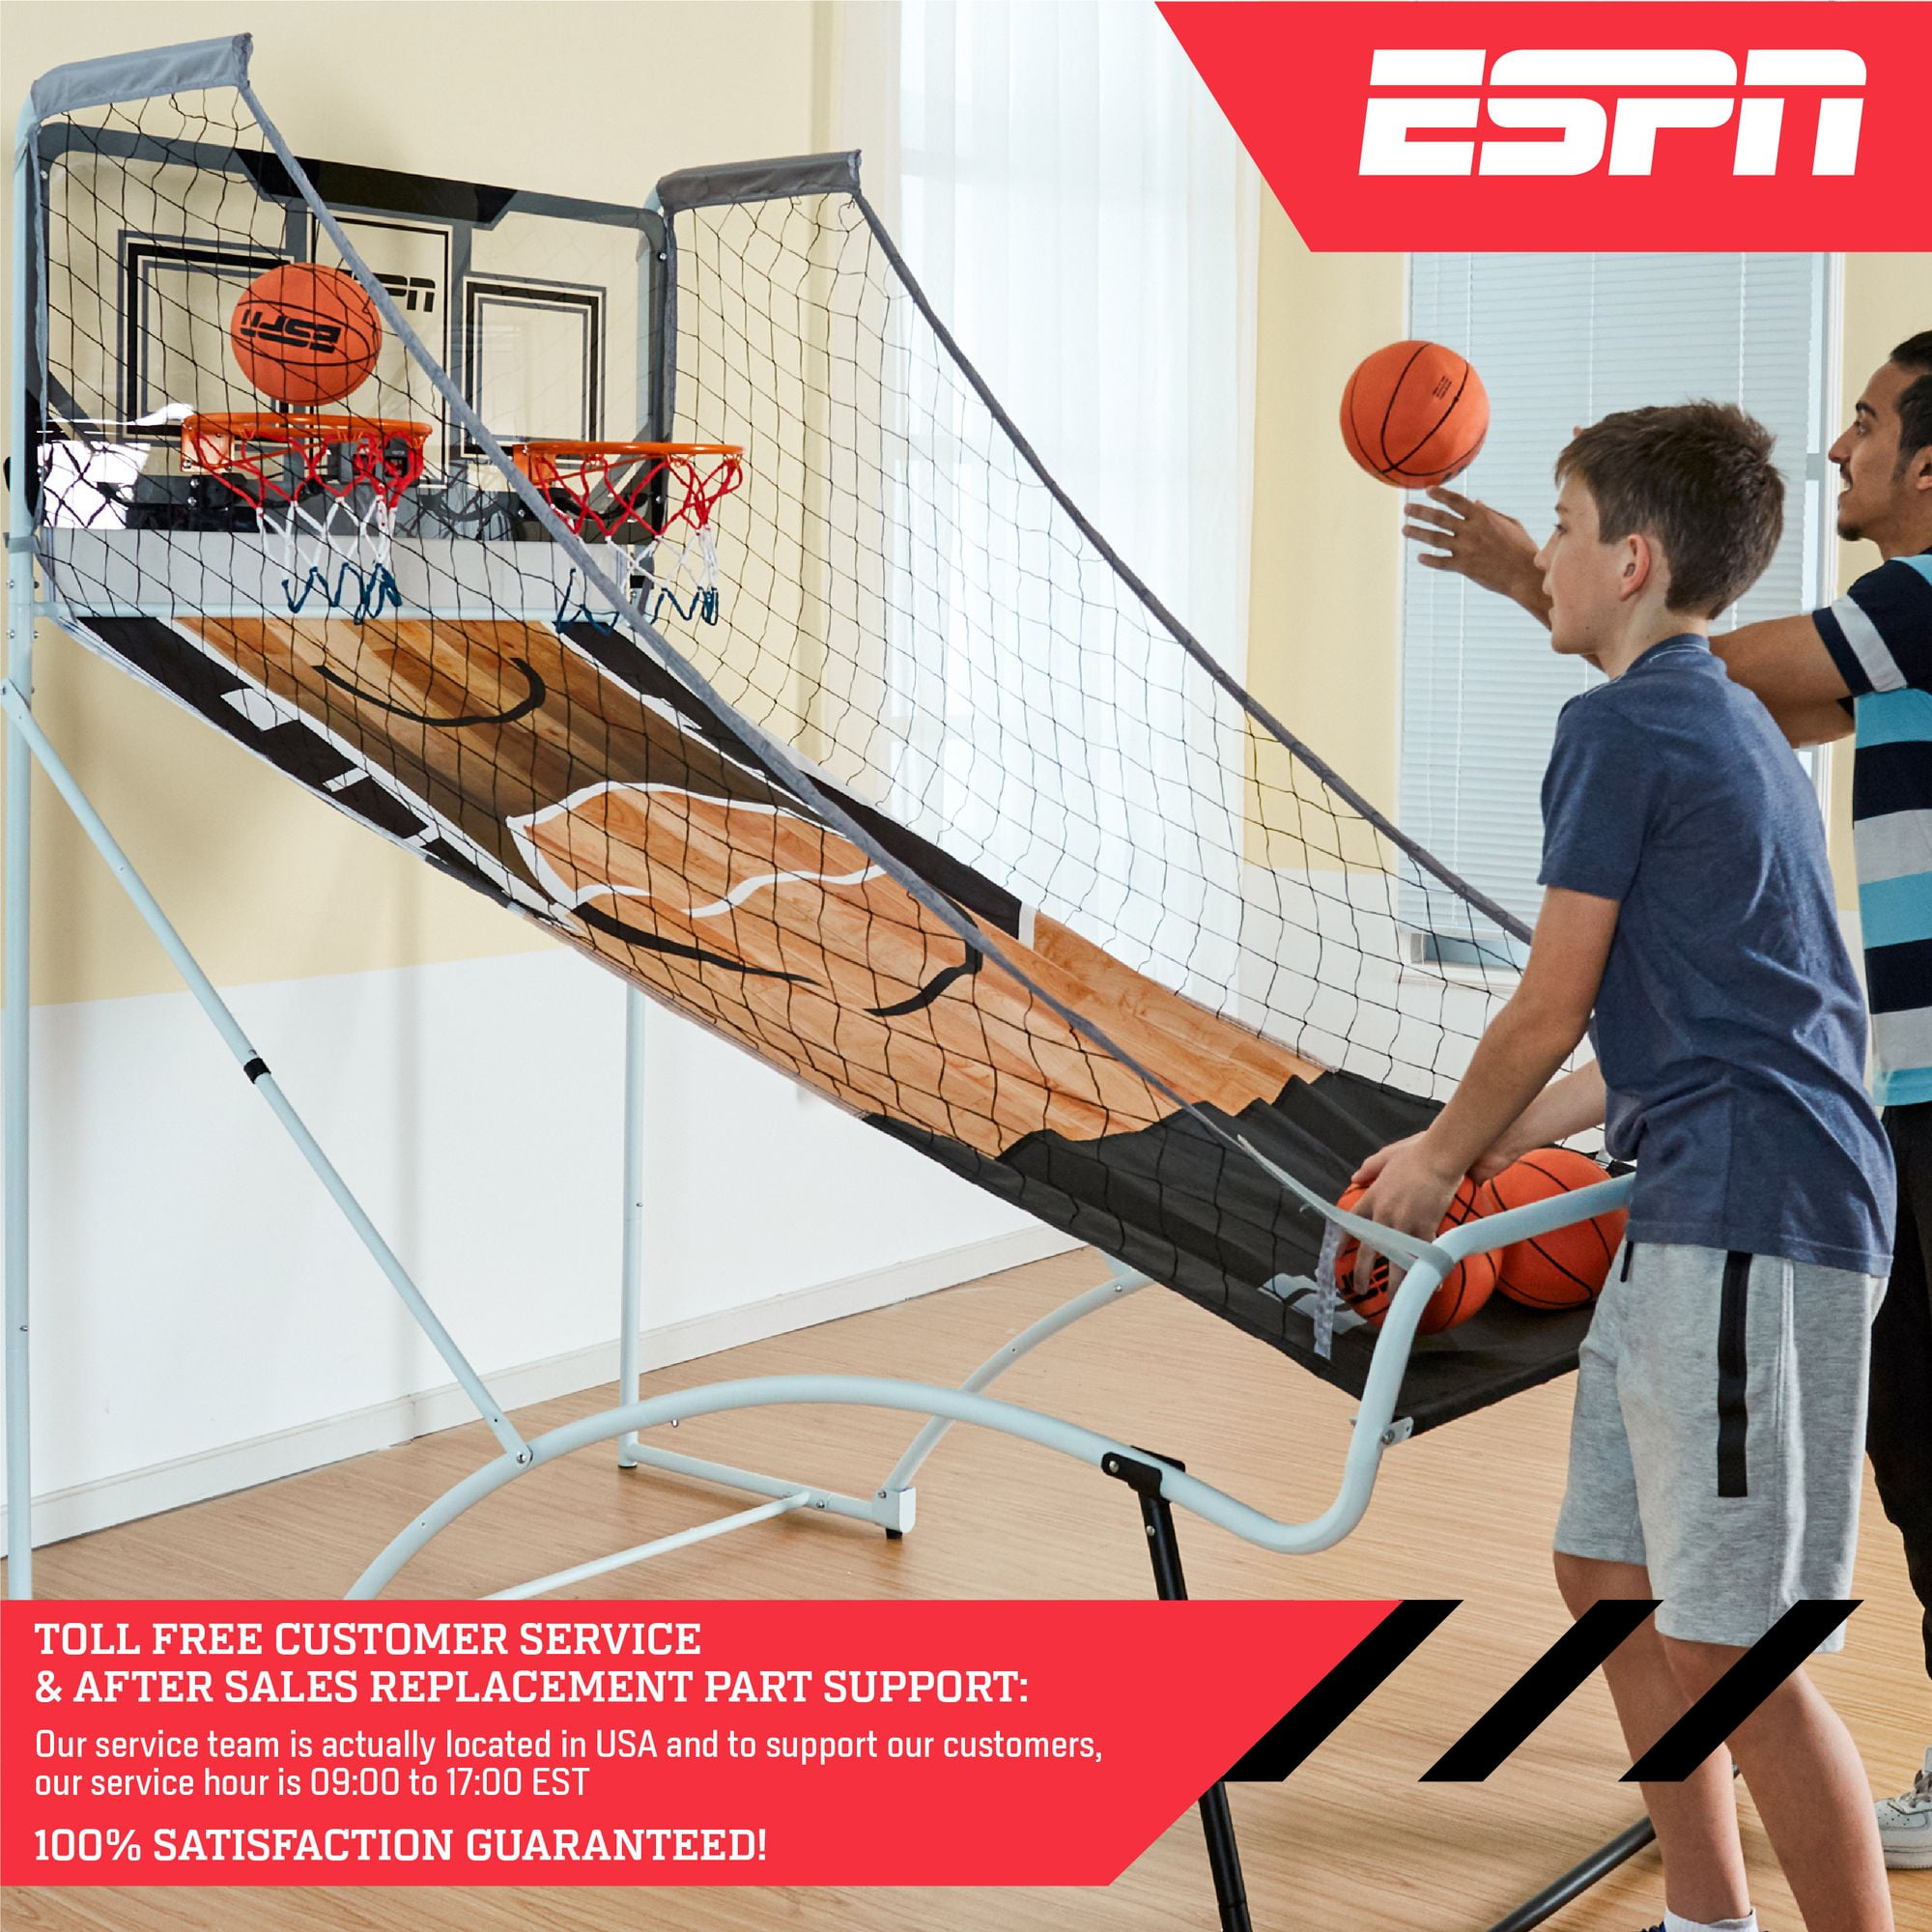 ESPN EZ Fold 2 player Basketball Game with Polycarbonate Backboard and LED Scoring 